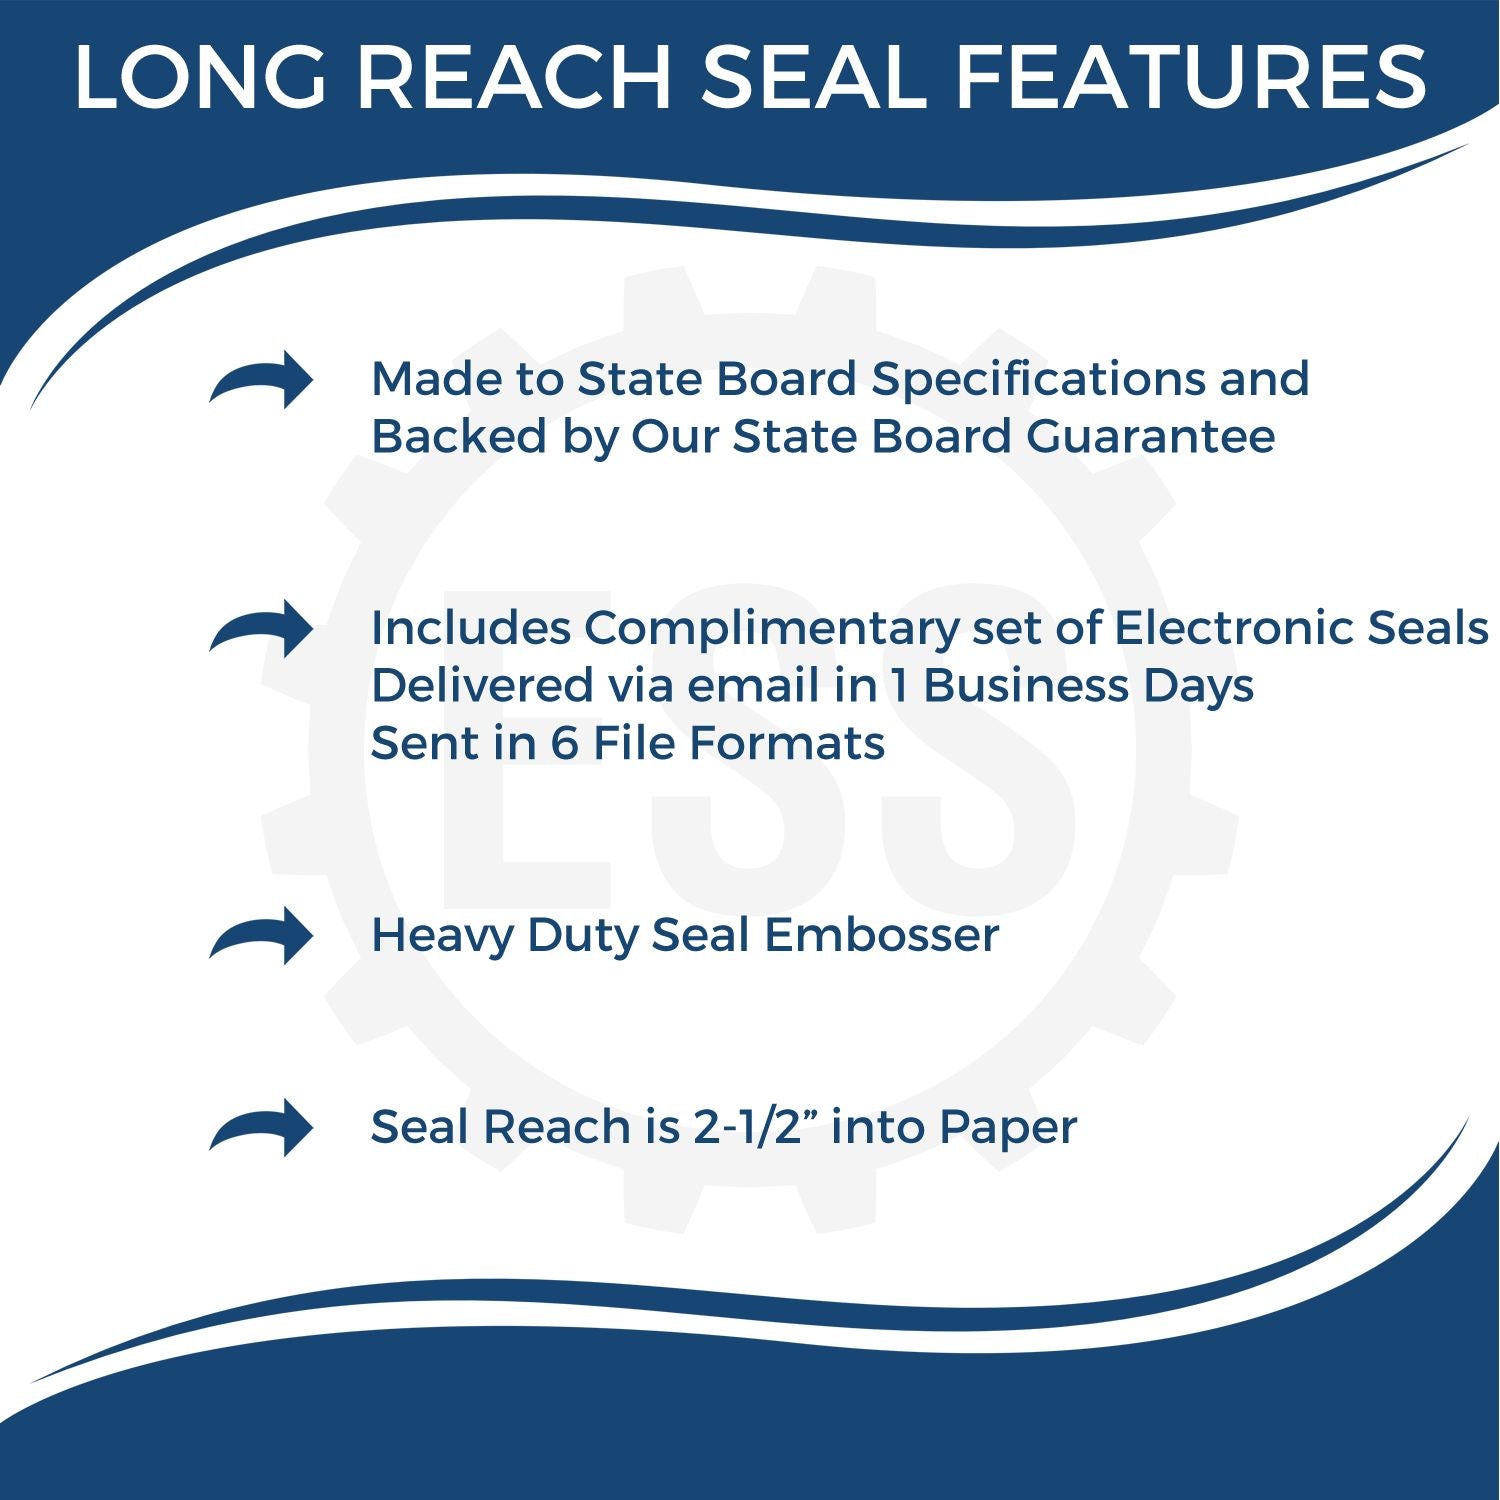 A picture of an infographic highlighting the selling points for the Long Reach South Dakota Geology Seal